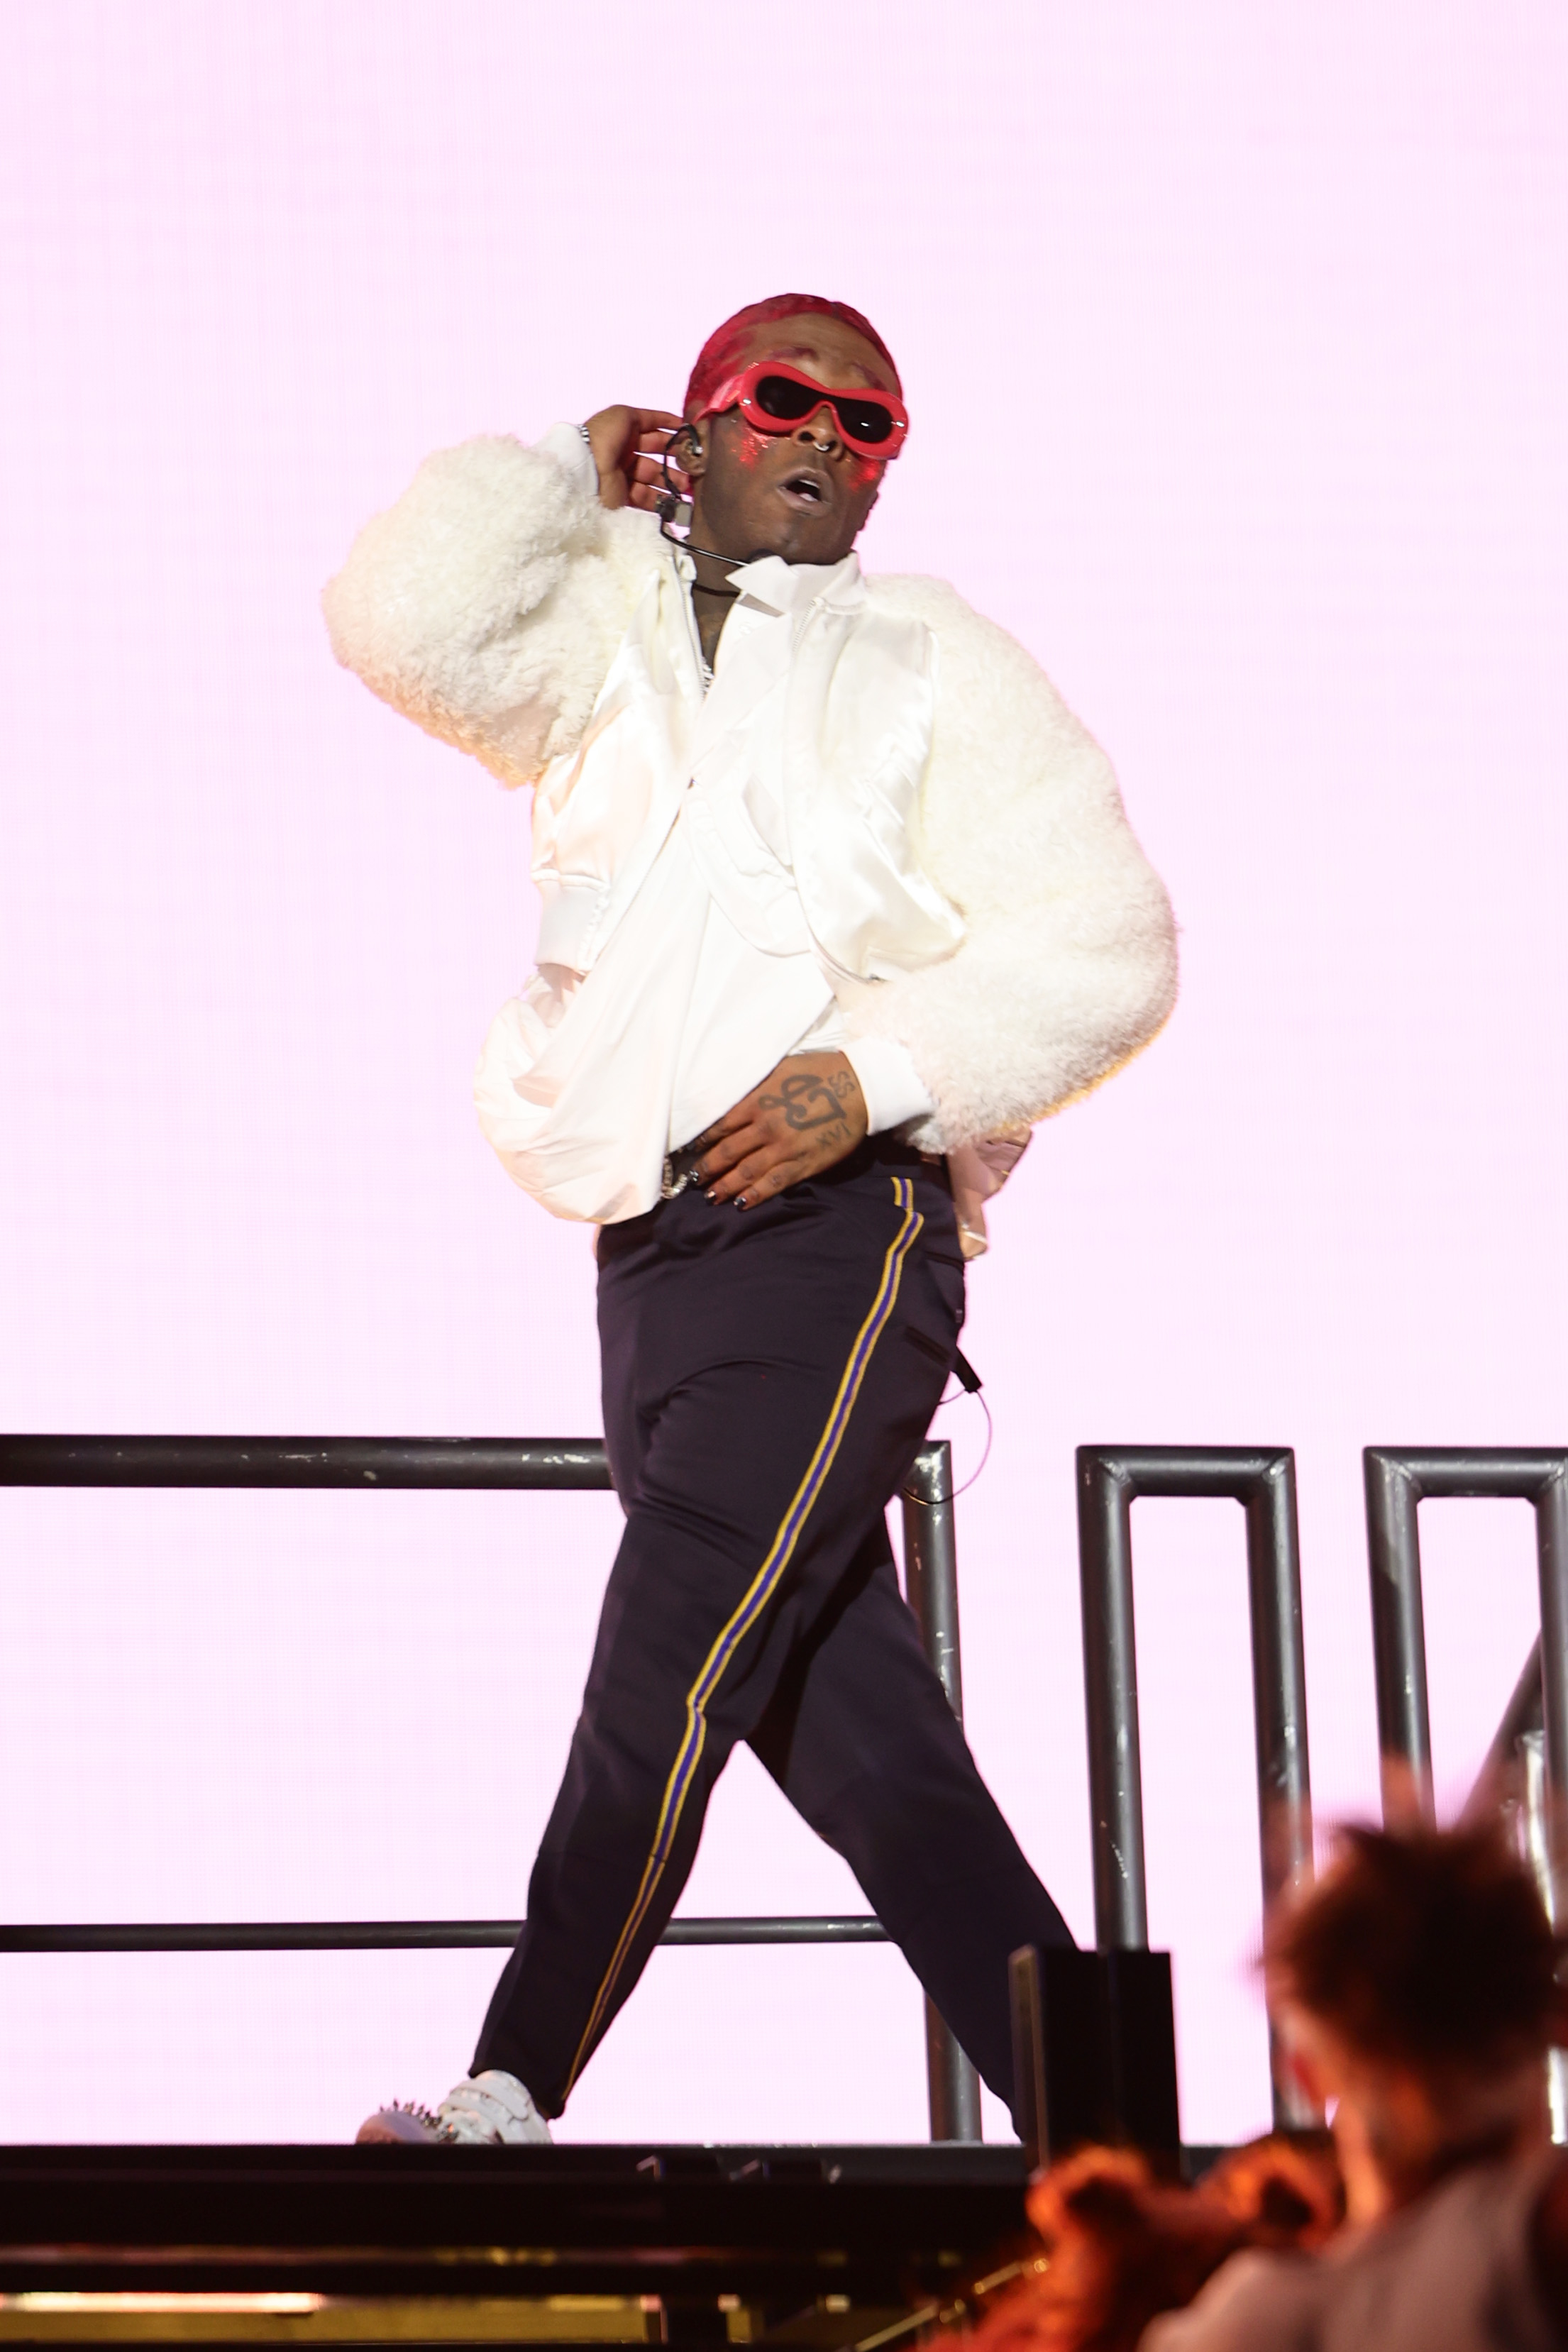 Performing artist on stage in a white fluffy jacket and striped pants, accessorized with red sunglasses